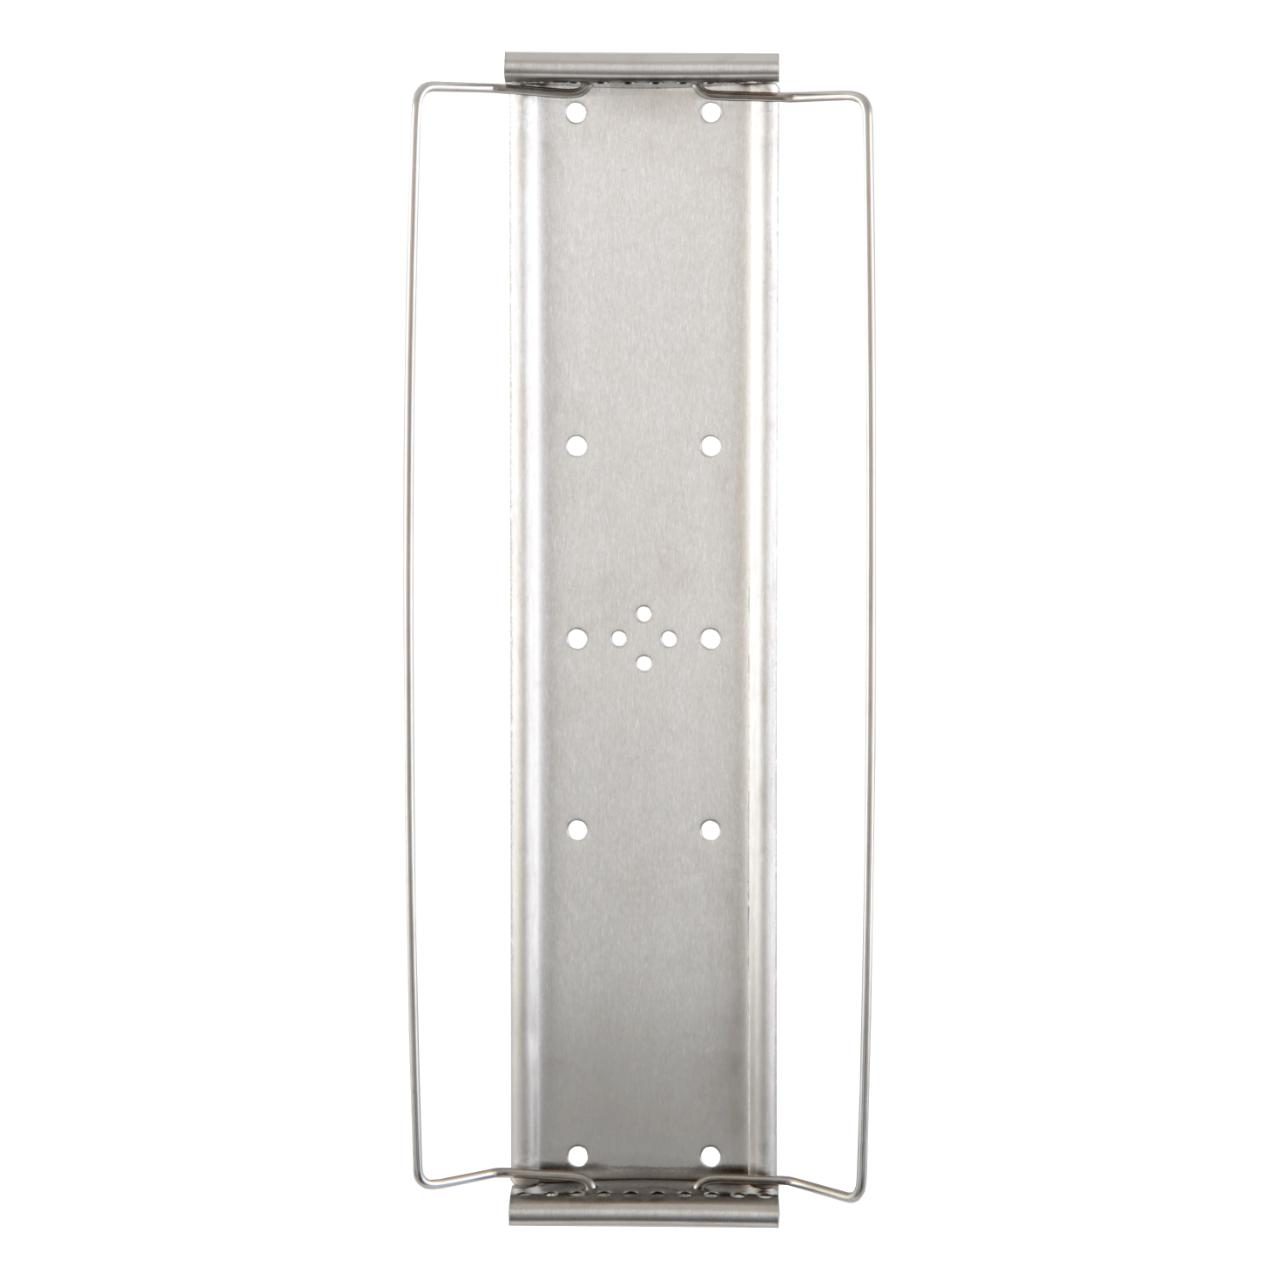 Empty Tarifold Stainless Steel Wall Display Unit, A4, for 10 Pockets, with Side Stops